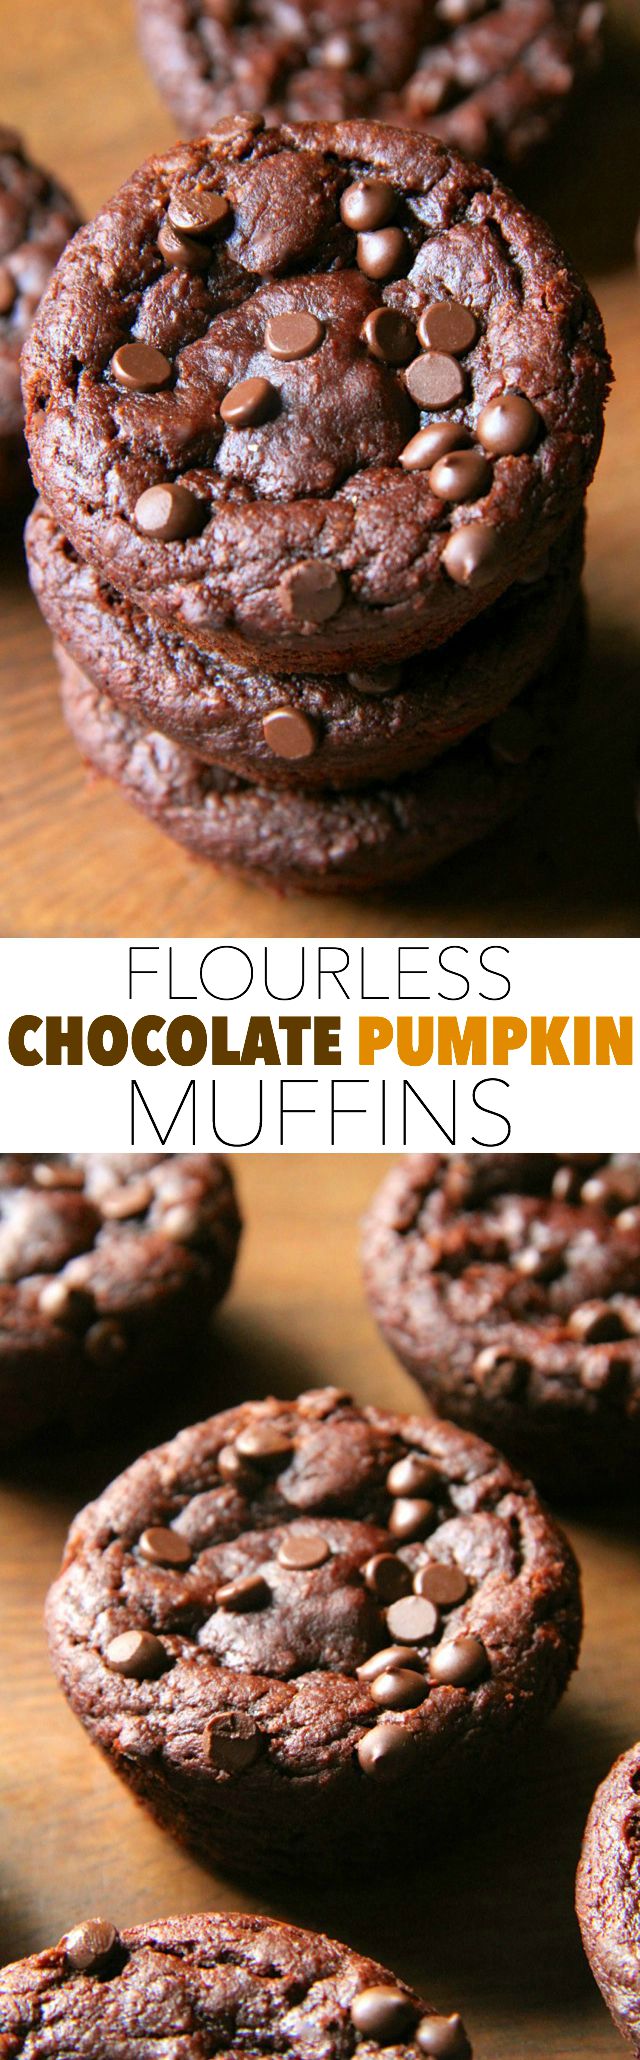 Flourless Chocolate Pumpkin Muffins -- gluten-free, grain-free, oil-free, dairy-free, refined sugar-free, but so soft and delicious that you'd never be able to tell! || runningwithspoons.com #pumpkin #chocolate #fall